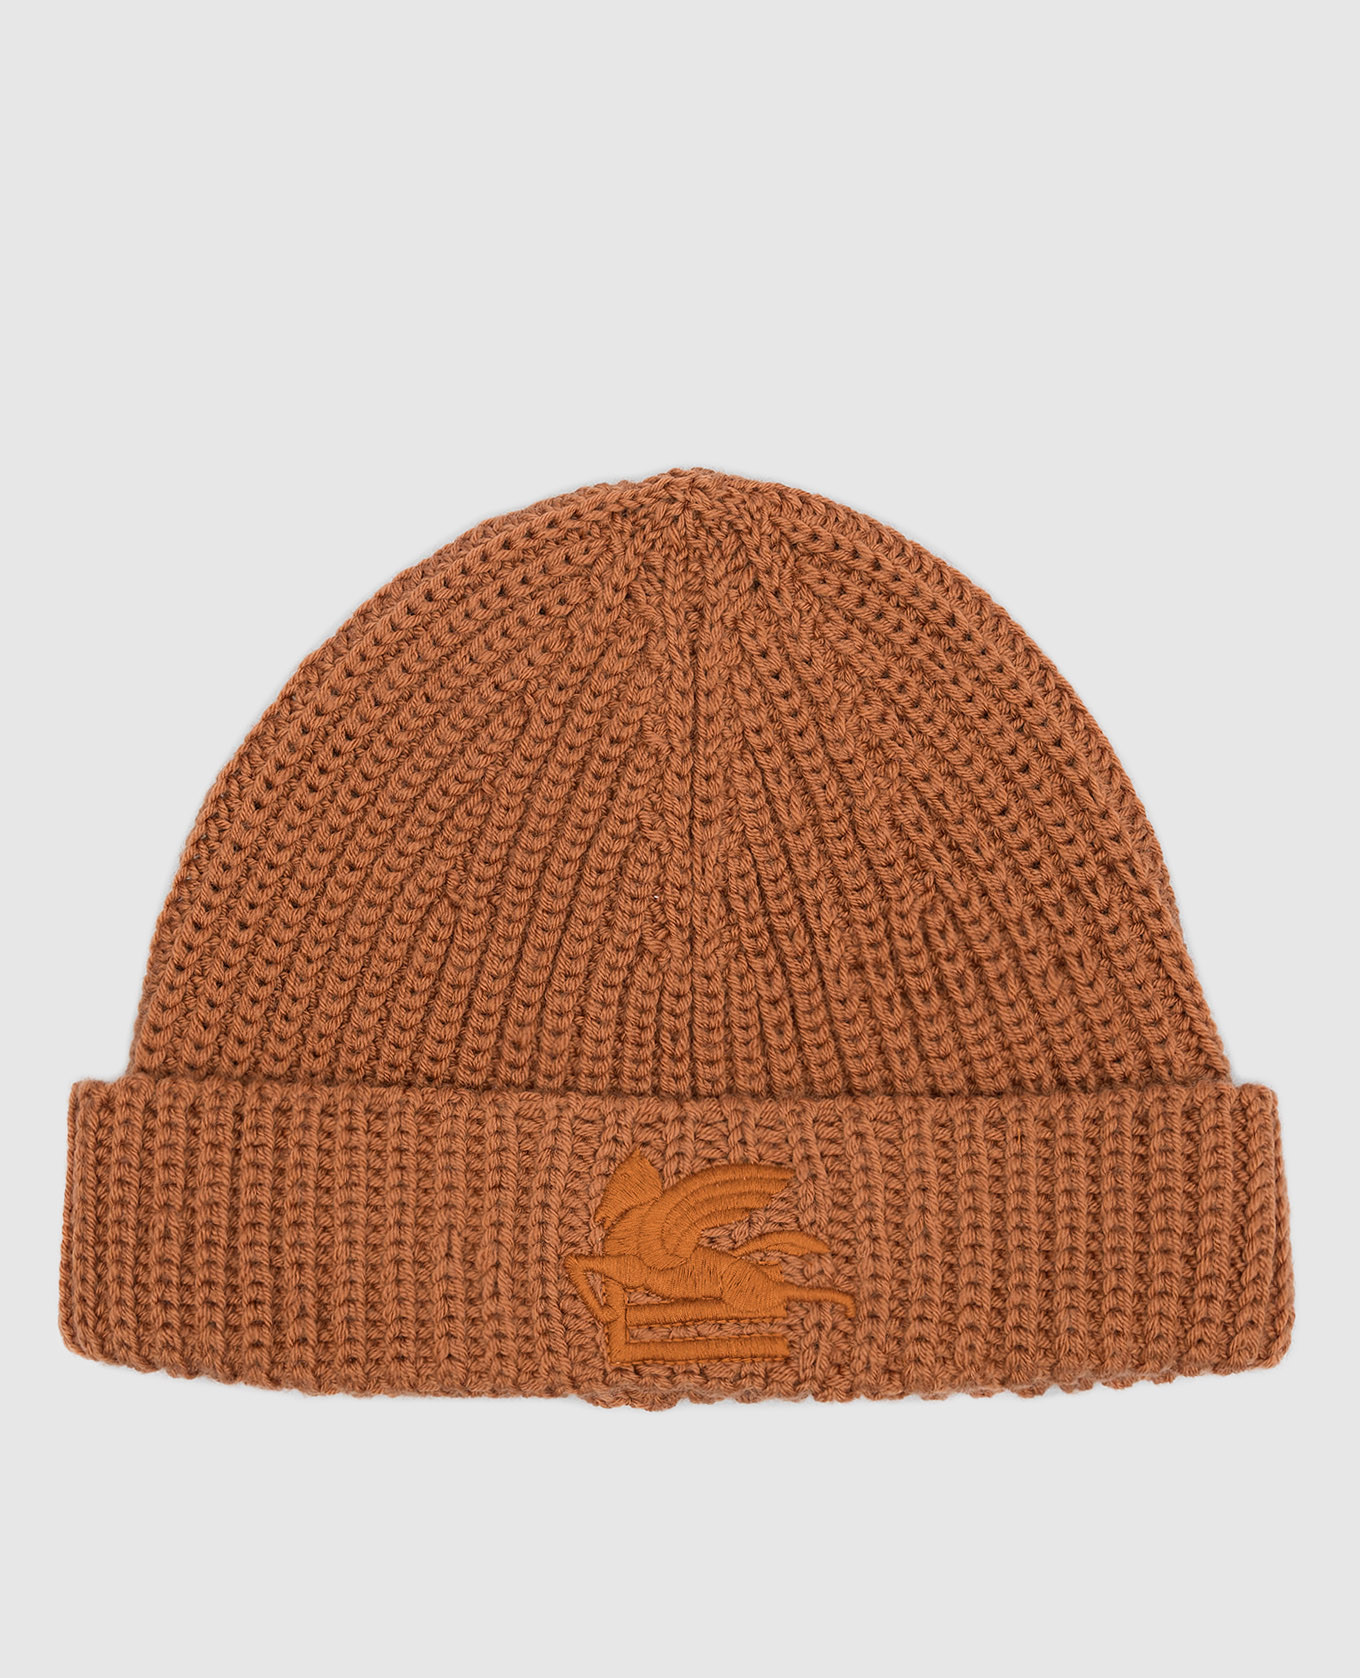 Brown wool cap with logo embroidery